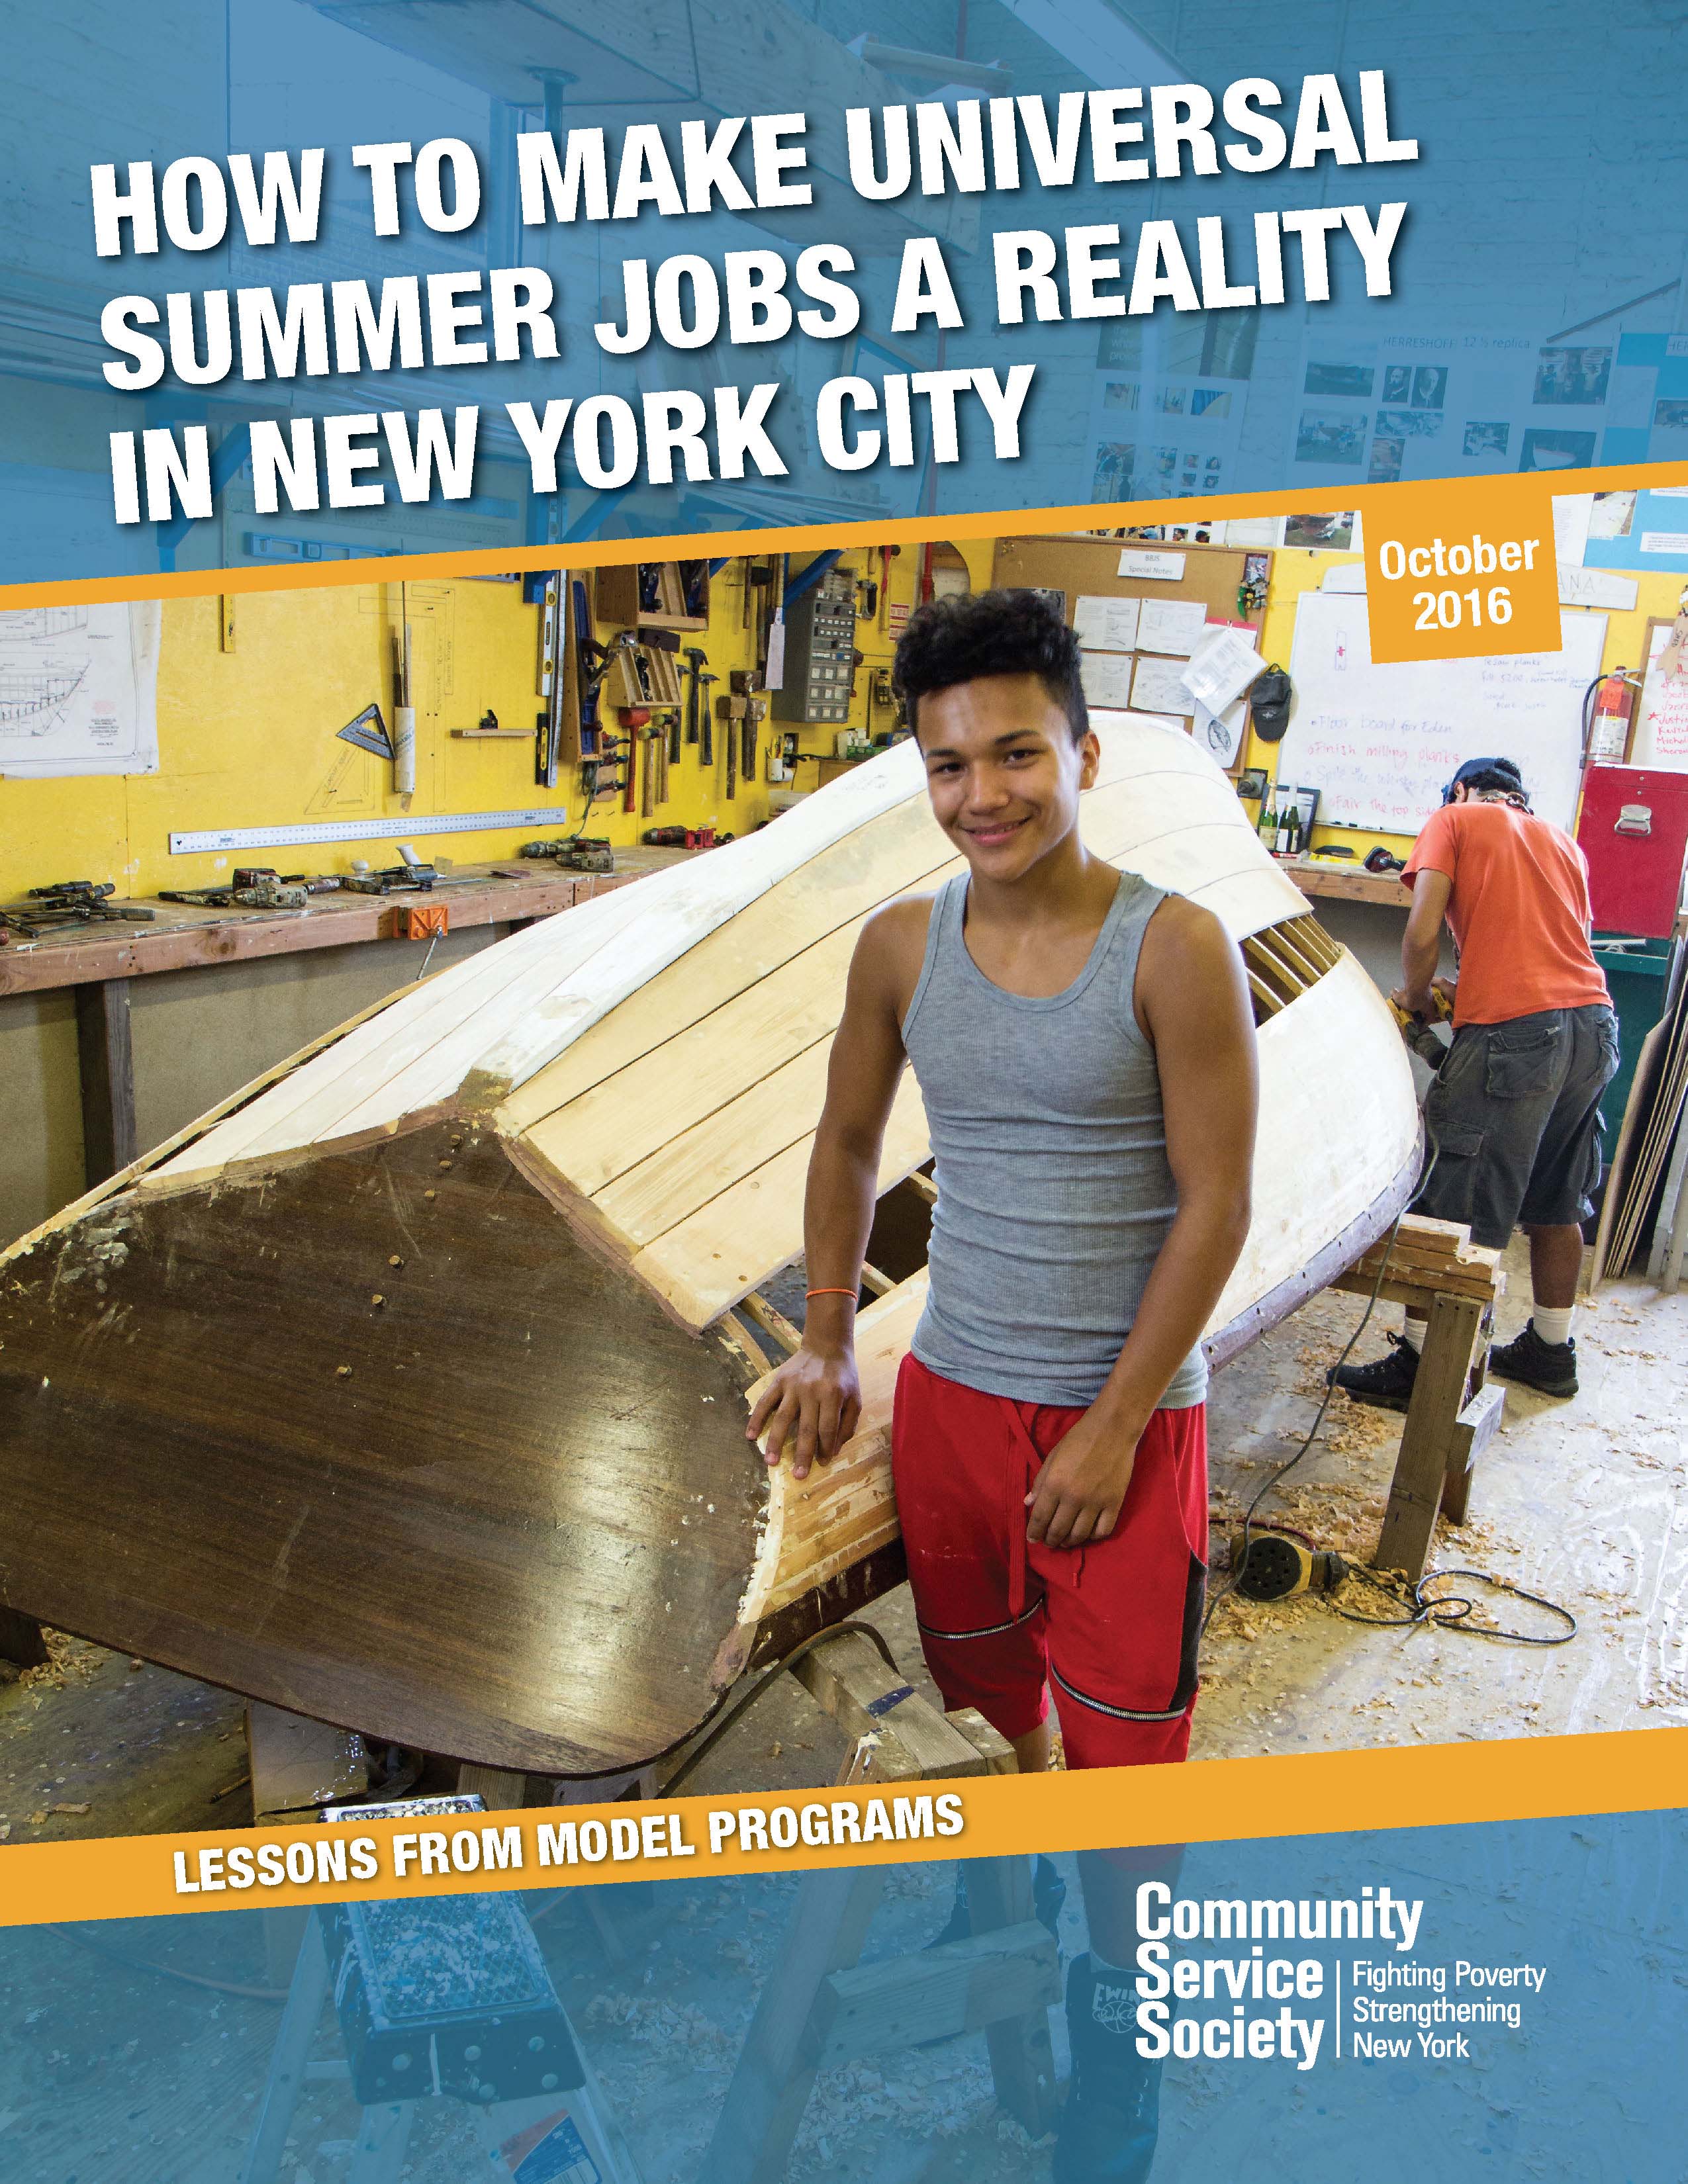 How to Make Universal Summer Jobs a Reality in New York City: Lessons from Model Programs